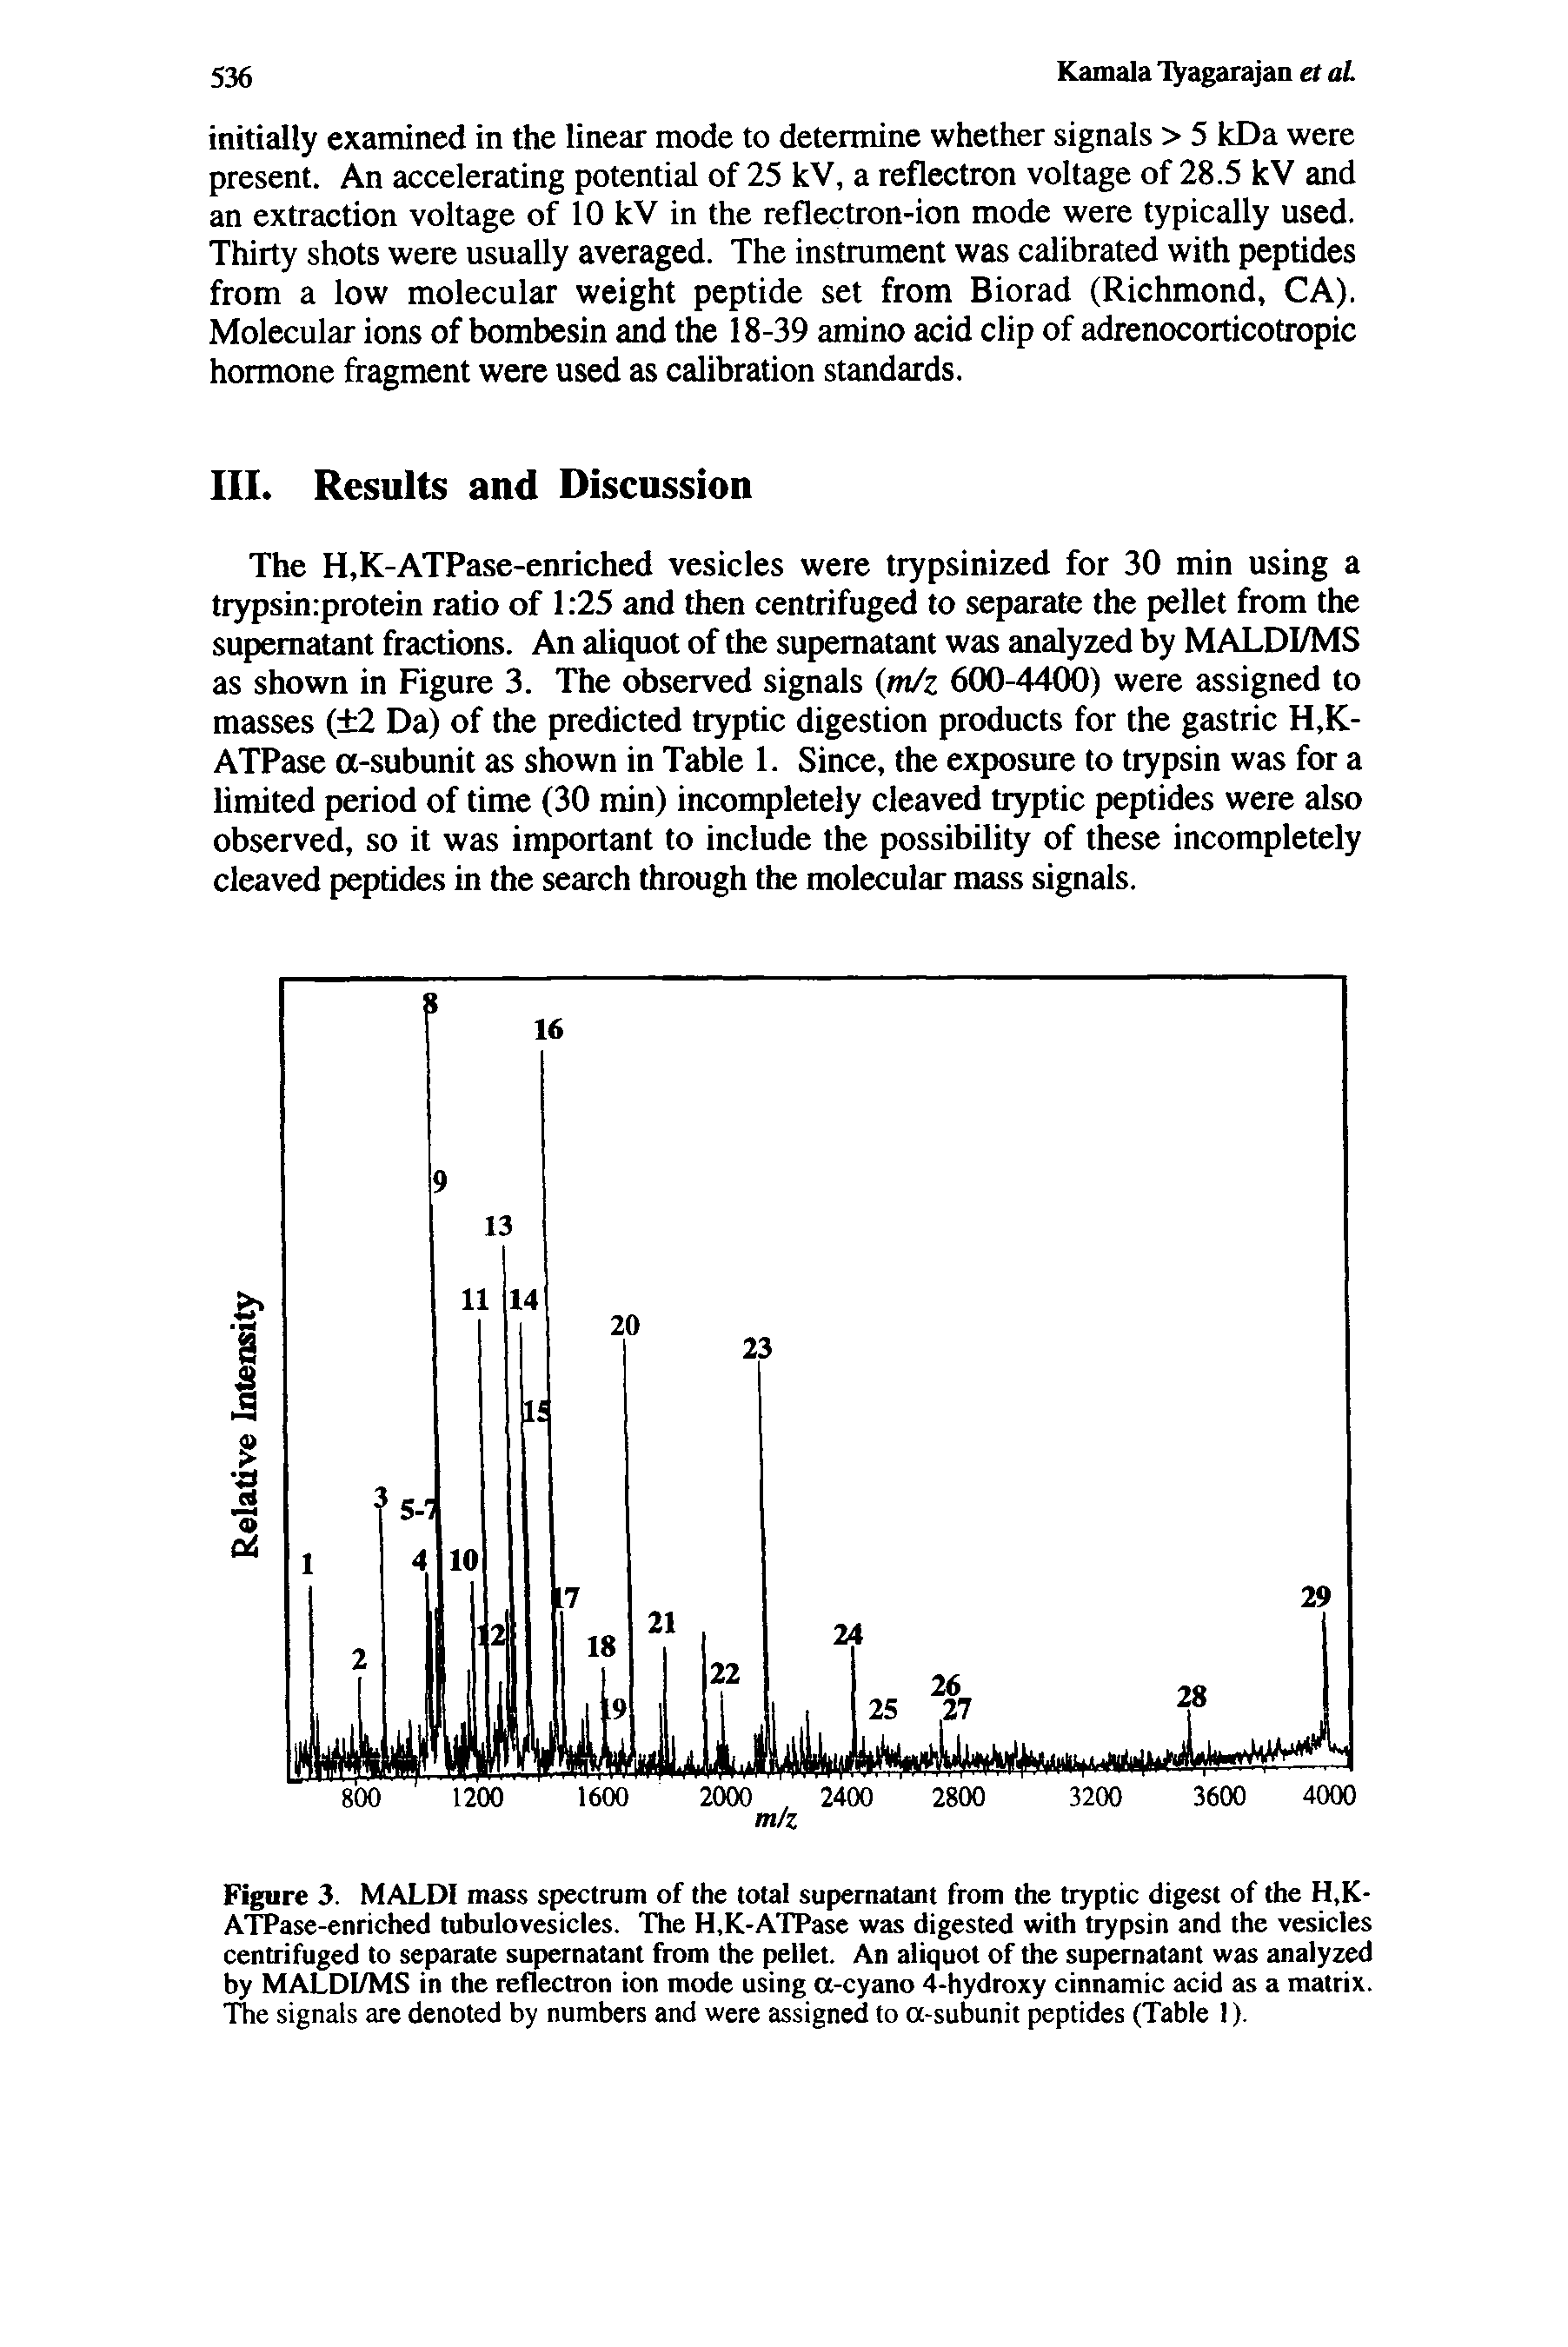 Figure 3. MALDI mass spectrum of the total supernatant from the tryptic digest of the H,K-ATPase-enriched tubulovesicles. The H,K-ATPase was digested with tiypsin and the vesicles centrifuged to separate supernatant from the pellet. An aliquot of the supernatant was analyzed by MALDl/MS in the reflectron ion mode using a-cyano 4-hydroxy cinnamic acid as a matrix. The signals are denoted by numbers and were assigned to a-subunit peptides (Table 1).